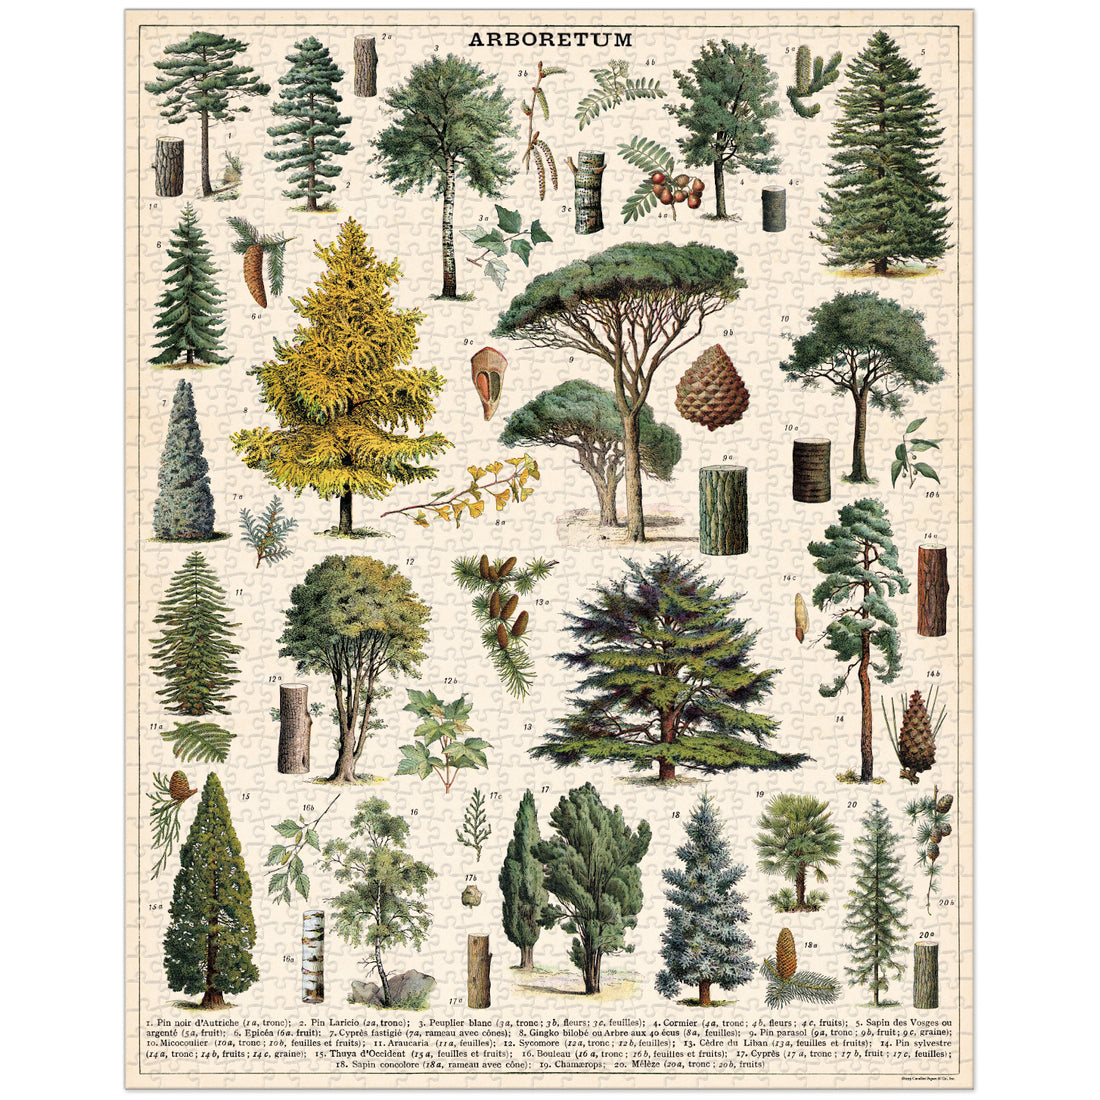 A 1000-piece Arboretum Puzzle featuring arboretum-themed vintage illustrations, packaged in a cylindrical container by Cavallini Papers &amp; Co.